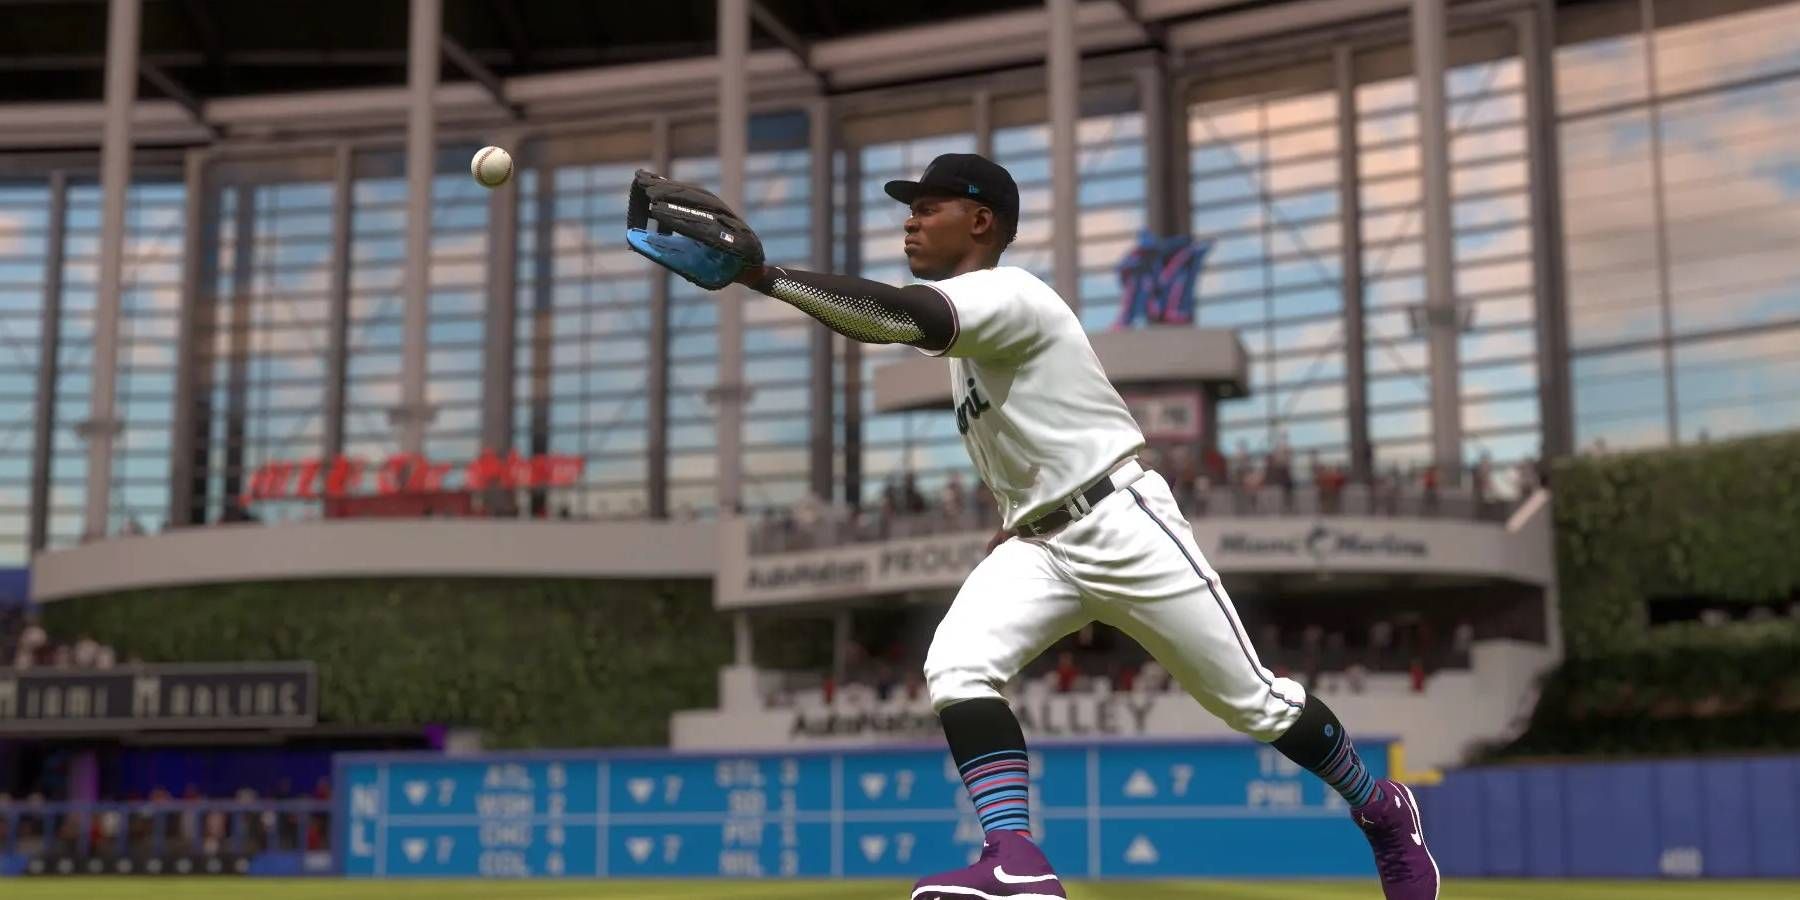 MLB The Show 23 Athlete Catching the Ball in Either Infield or Outfield Position with Glove Equipment